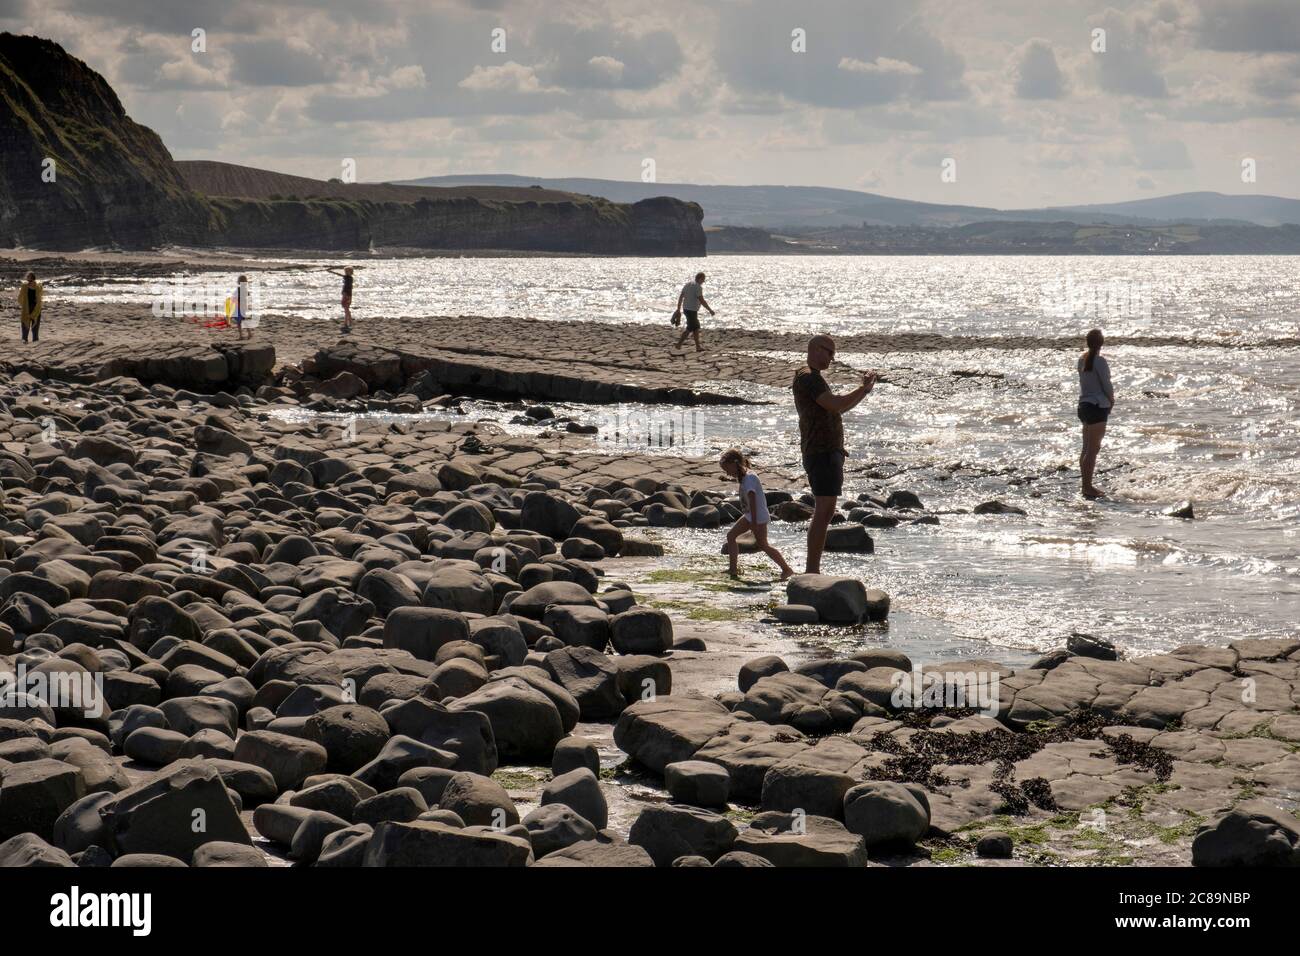 Kilve Beach, Somerset, UK, noted for it's fossils, geological formations and shale oil deposits, which were commercially exploited in the 1920's. Stock Photo